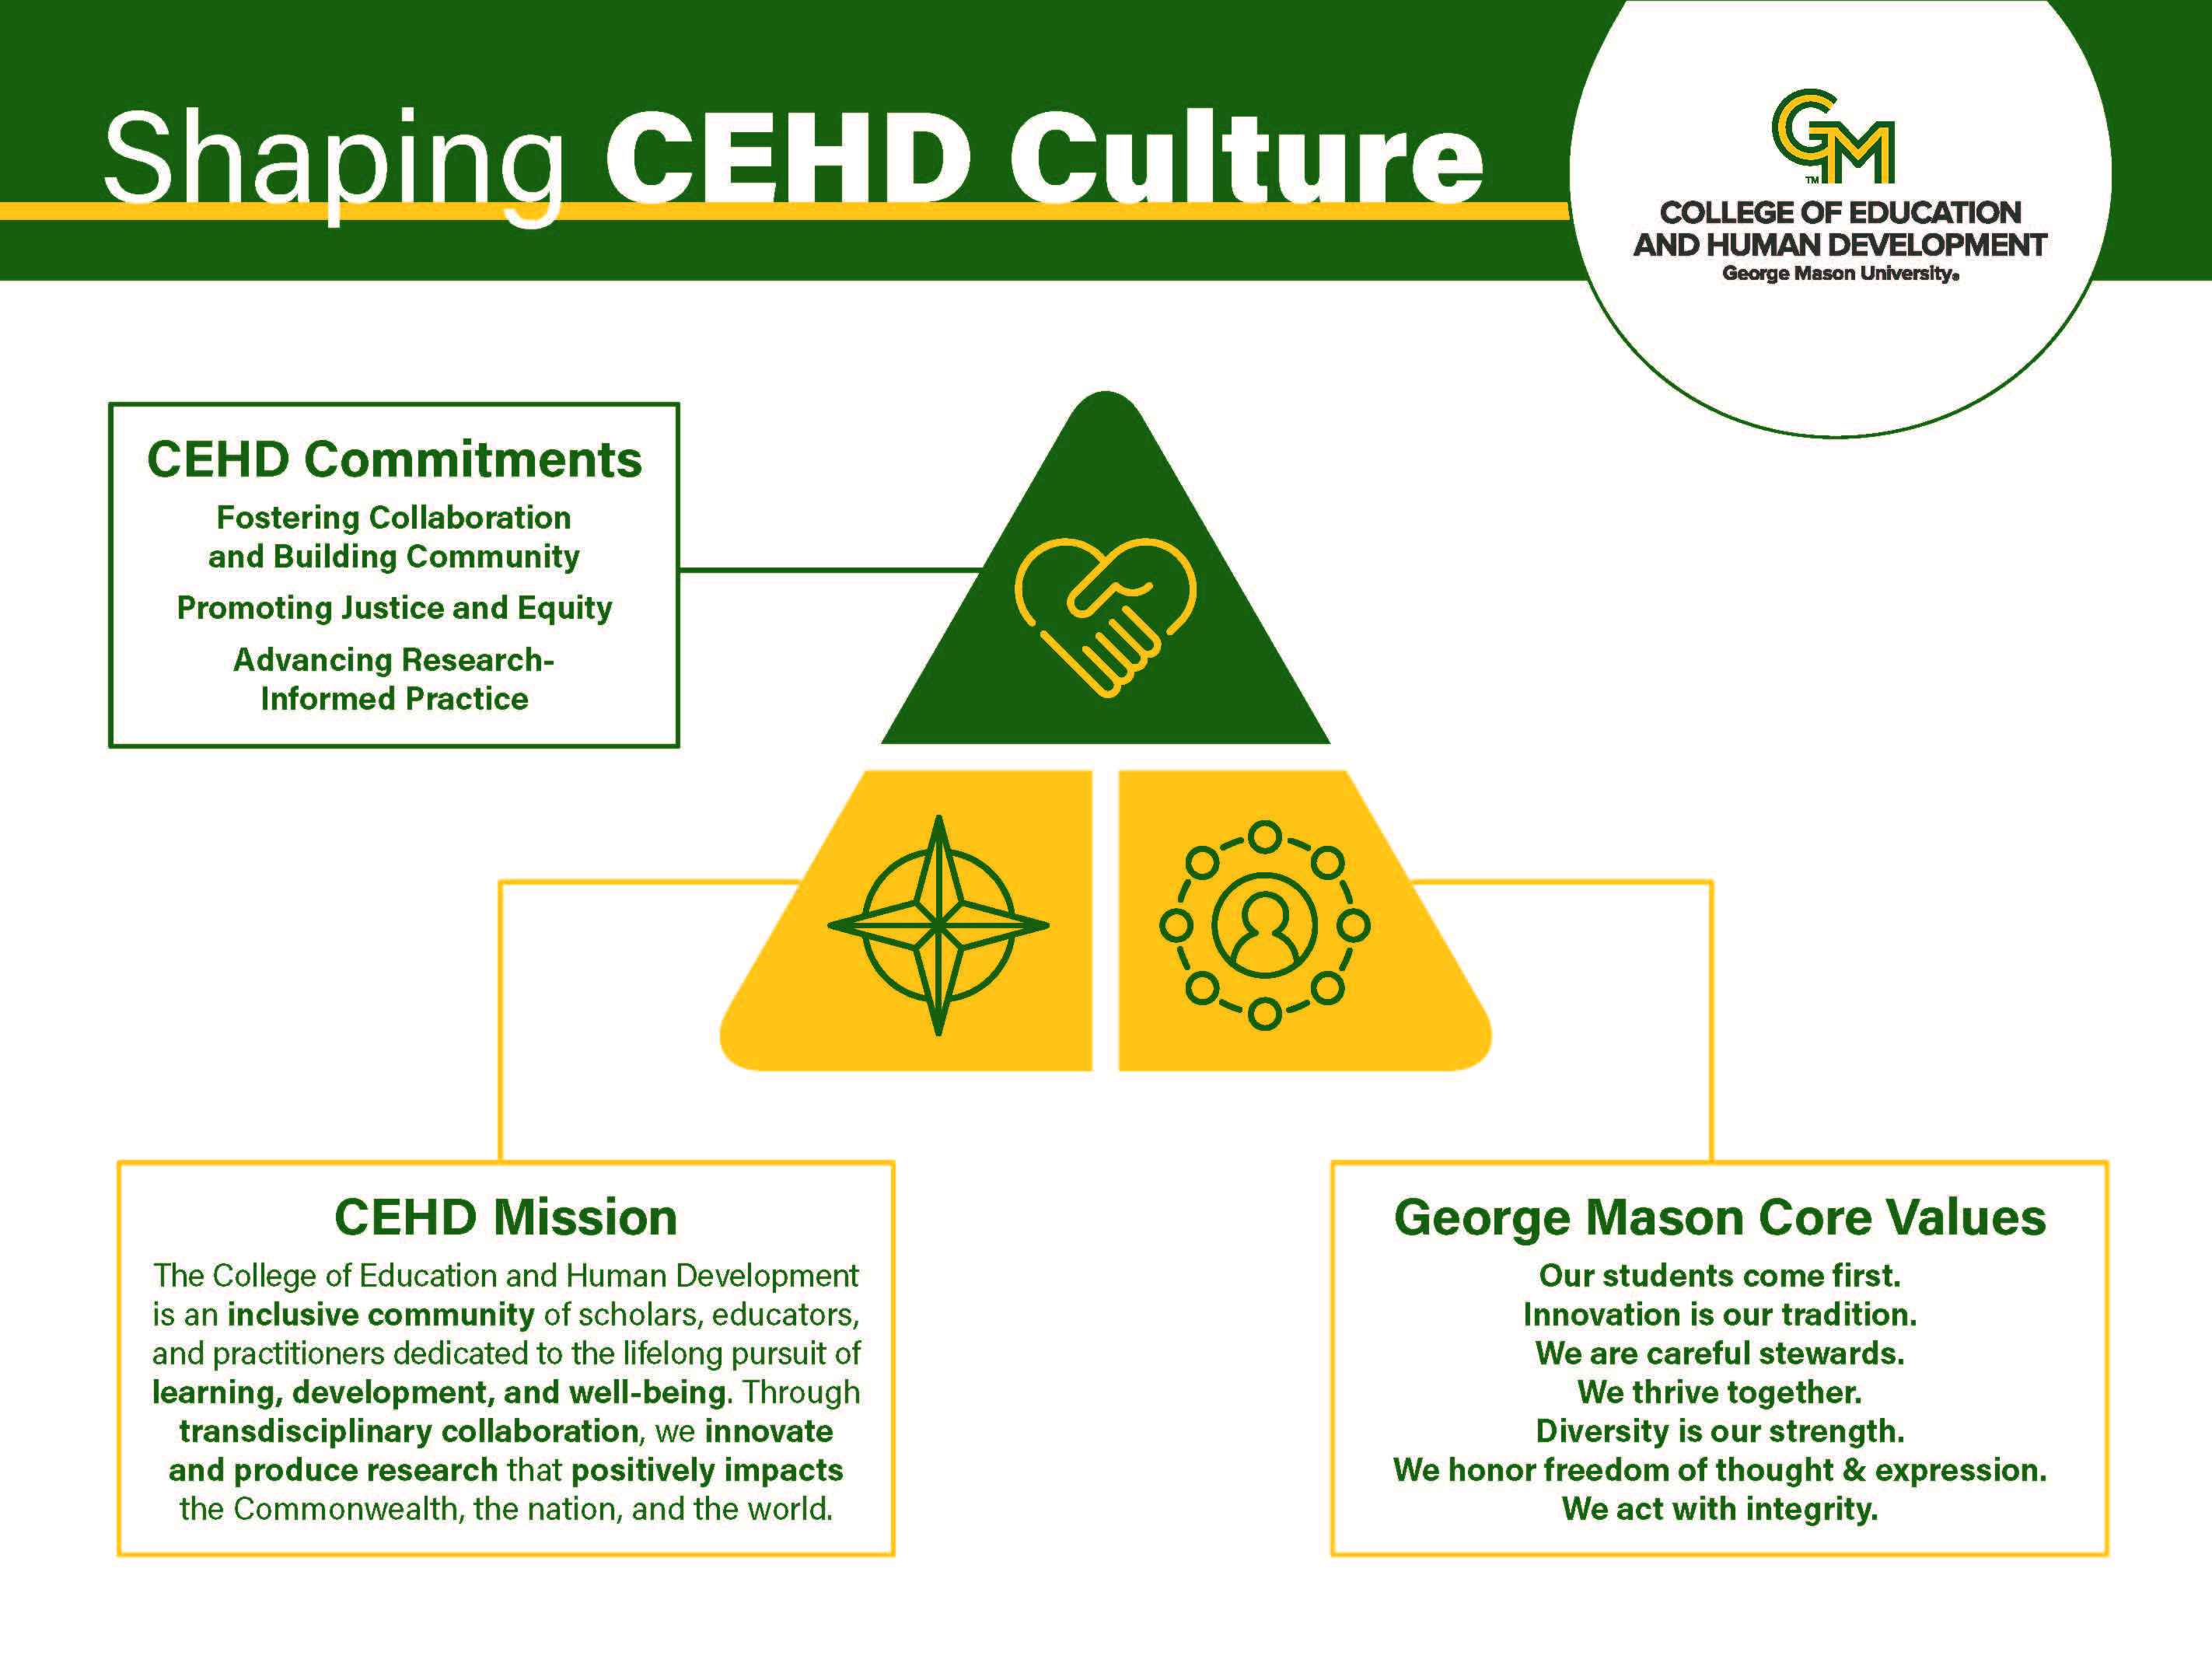 CEHD Commitments